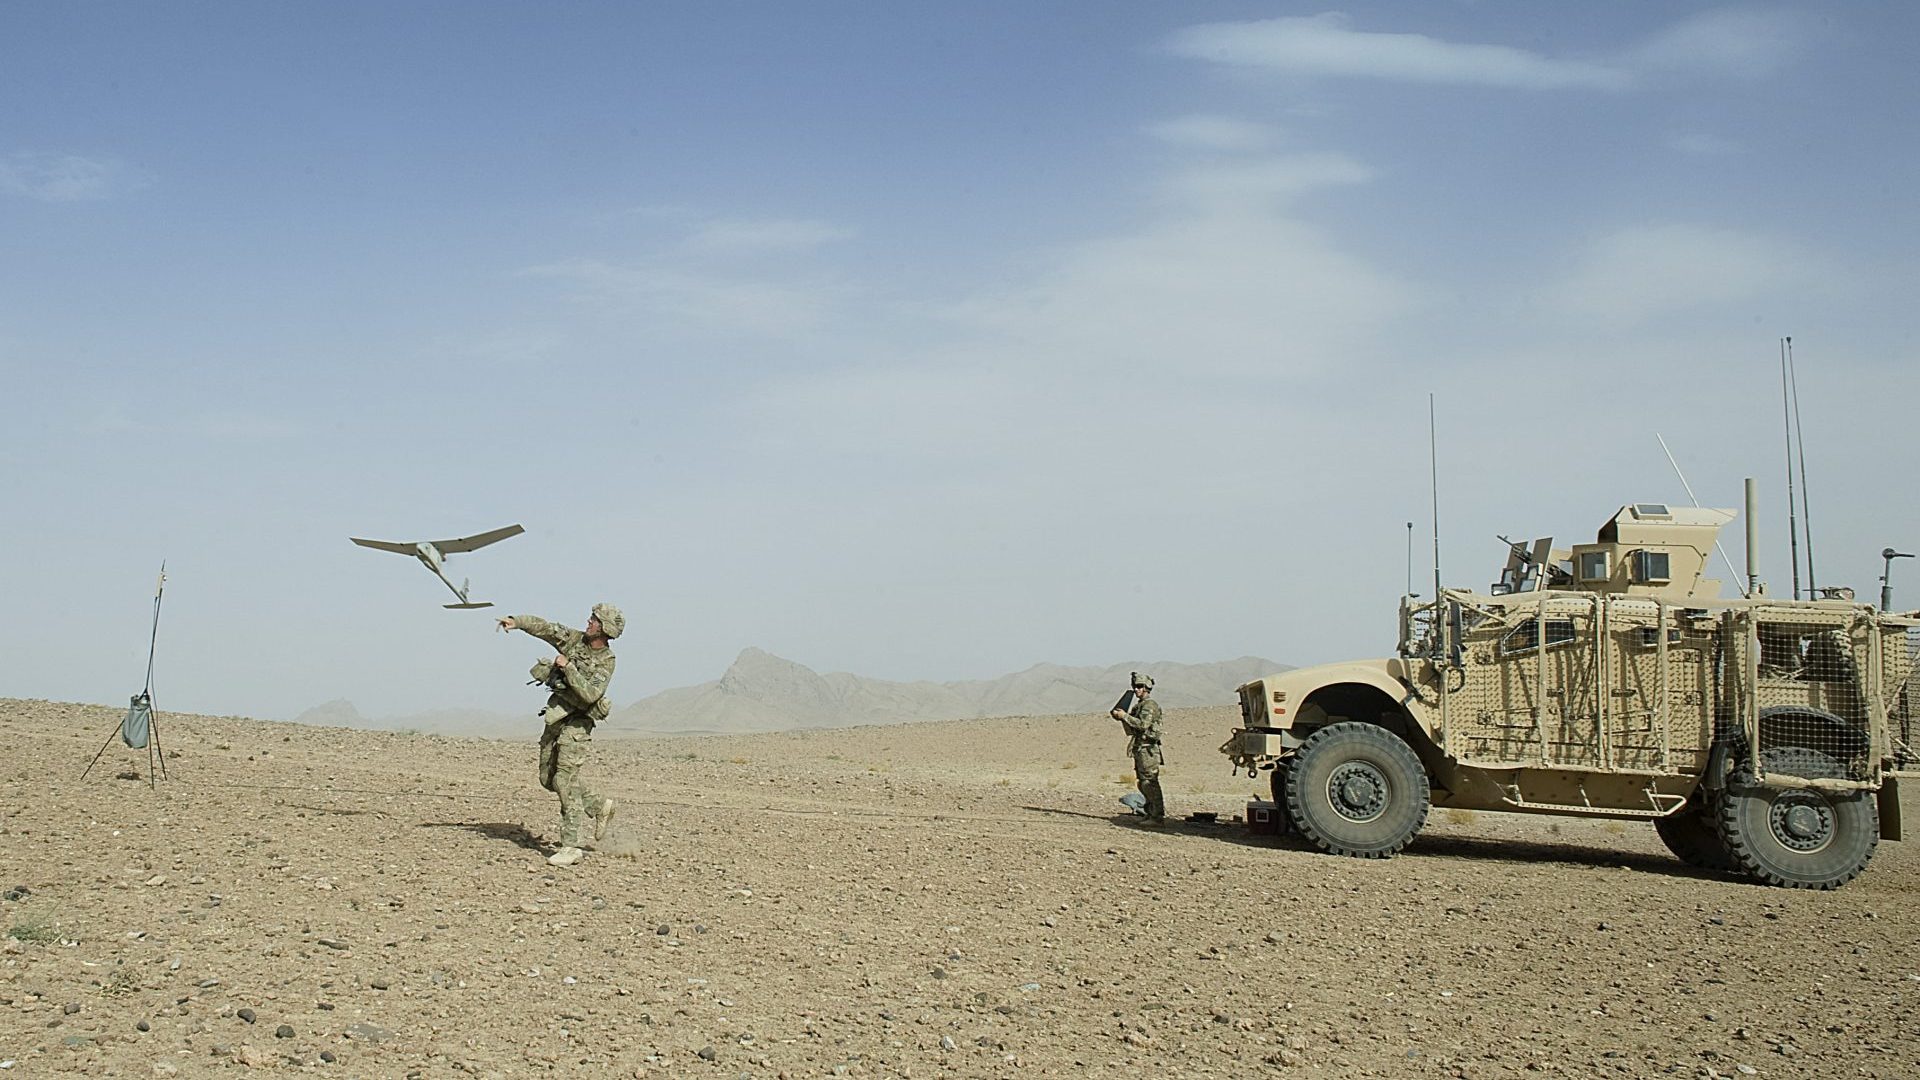 An aerial reconnaissance vessel is lauched by an American soldier. Photo: Tony Karumba/AFP/
Getty